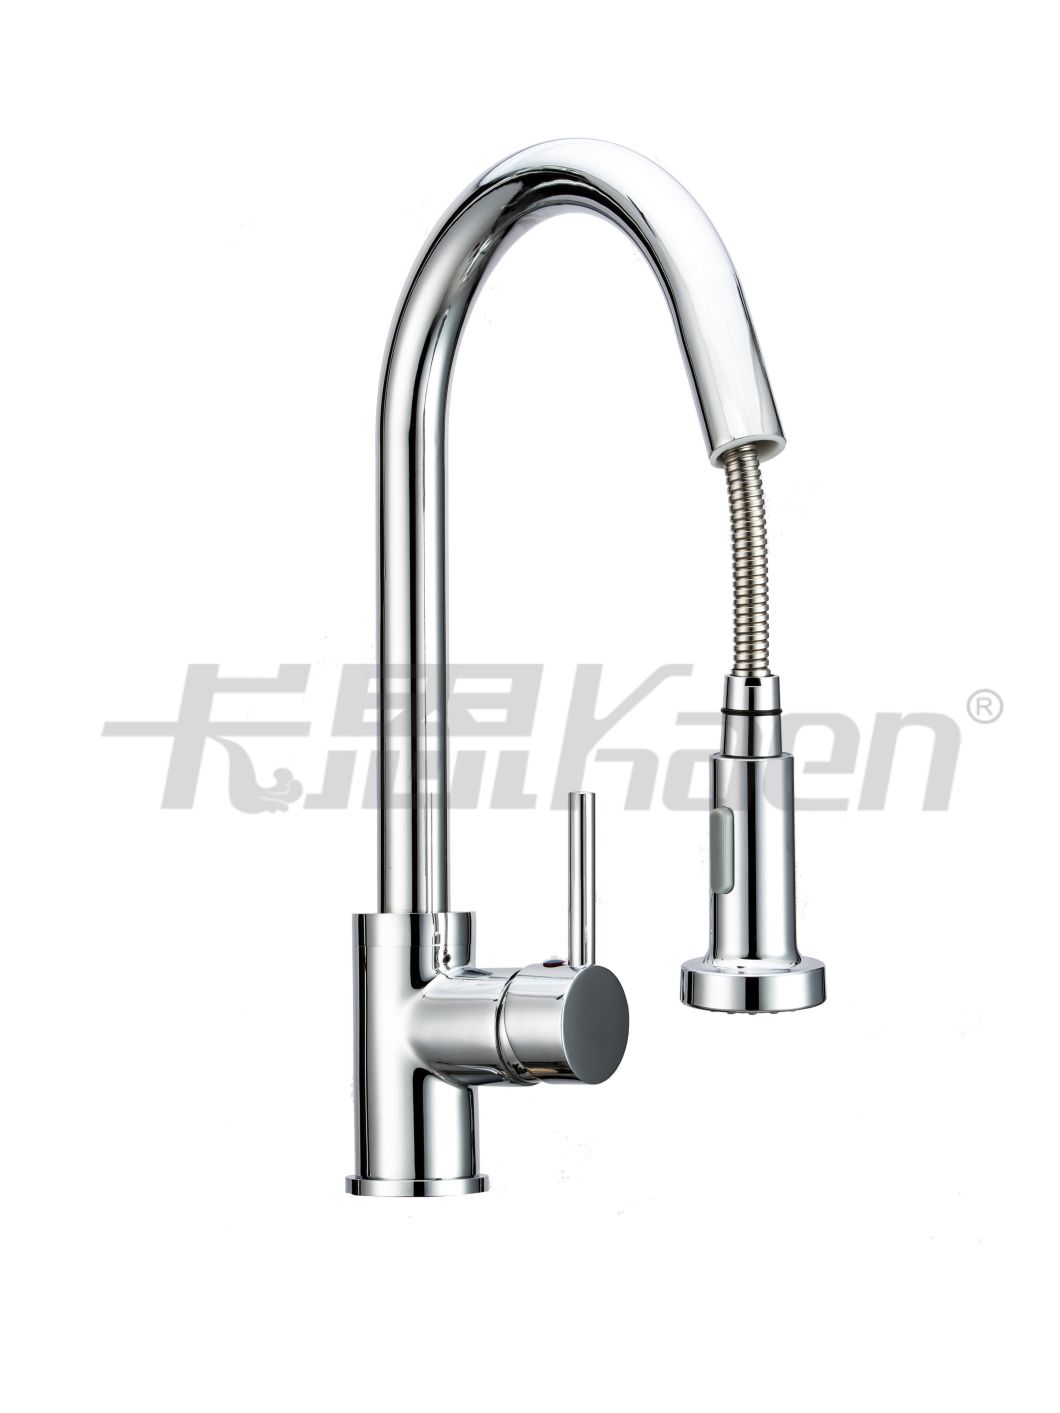 Kaen Chrome Pull Down Kitchen Faucet with spray 8383D